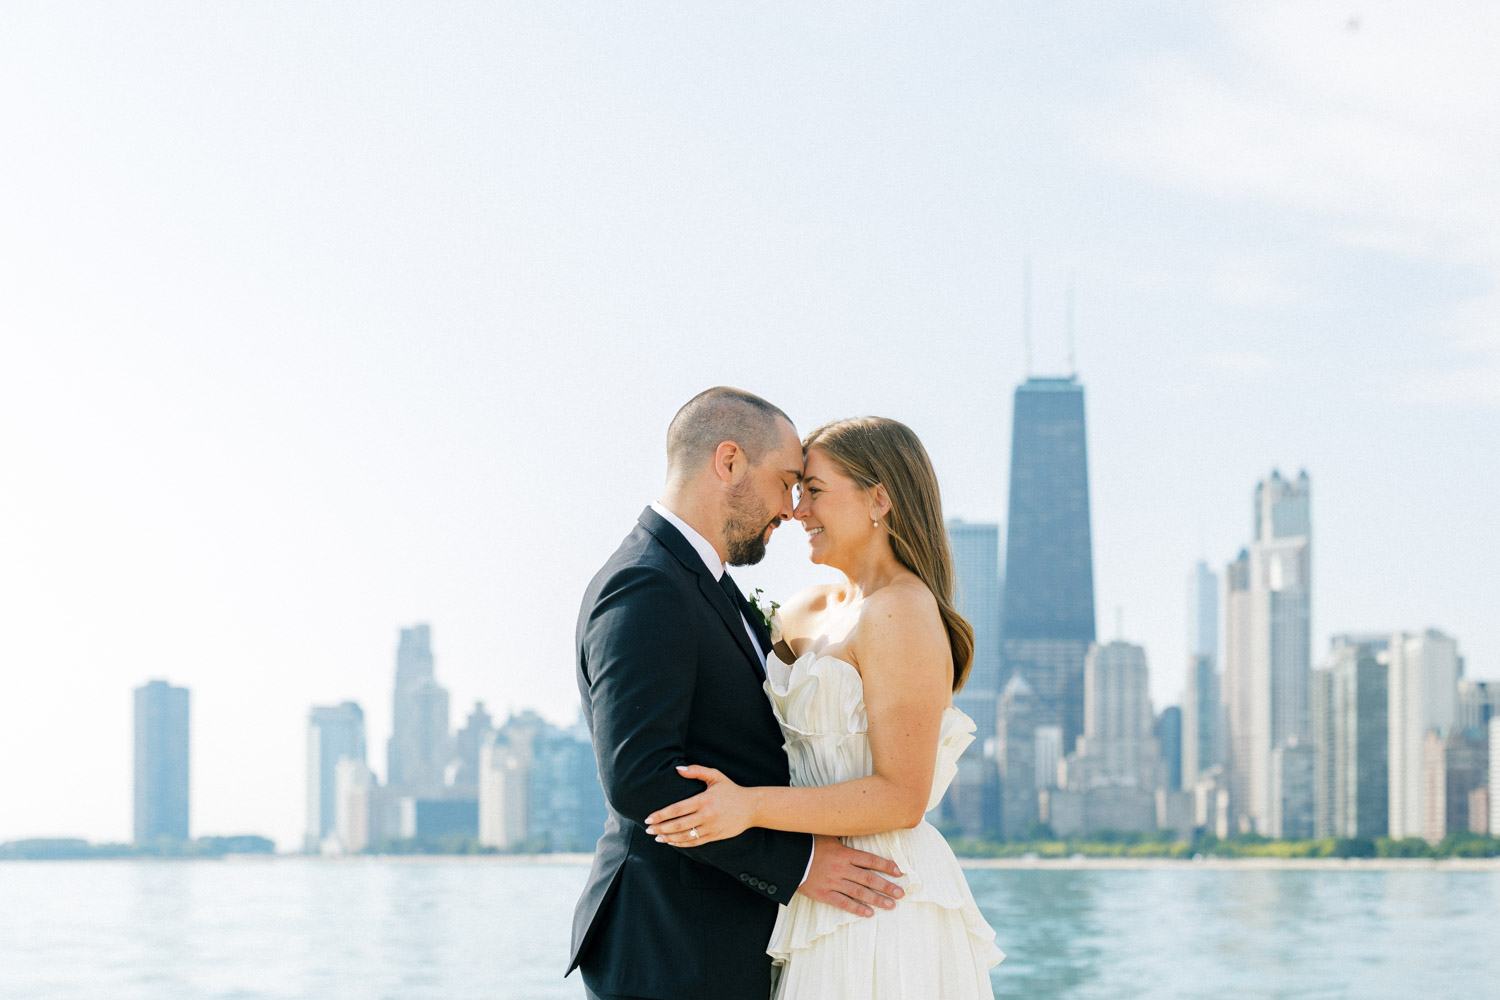 A Chicago elopement portrait in front of the city skyline